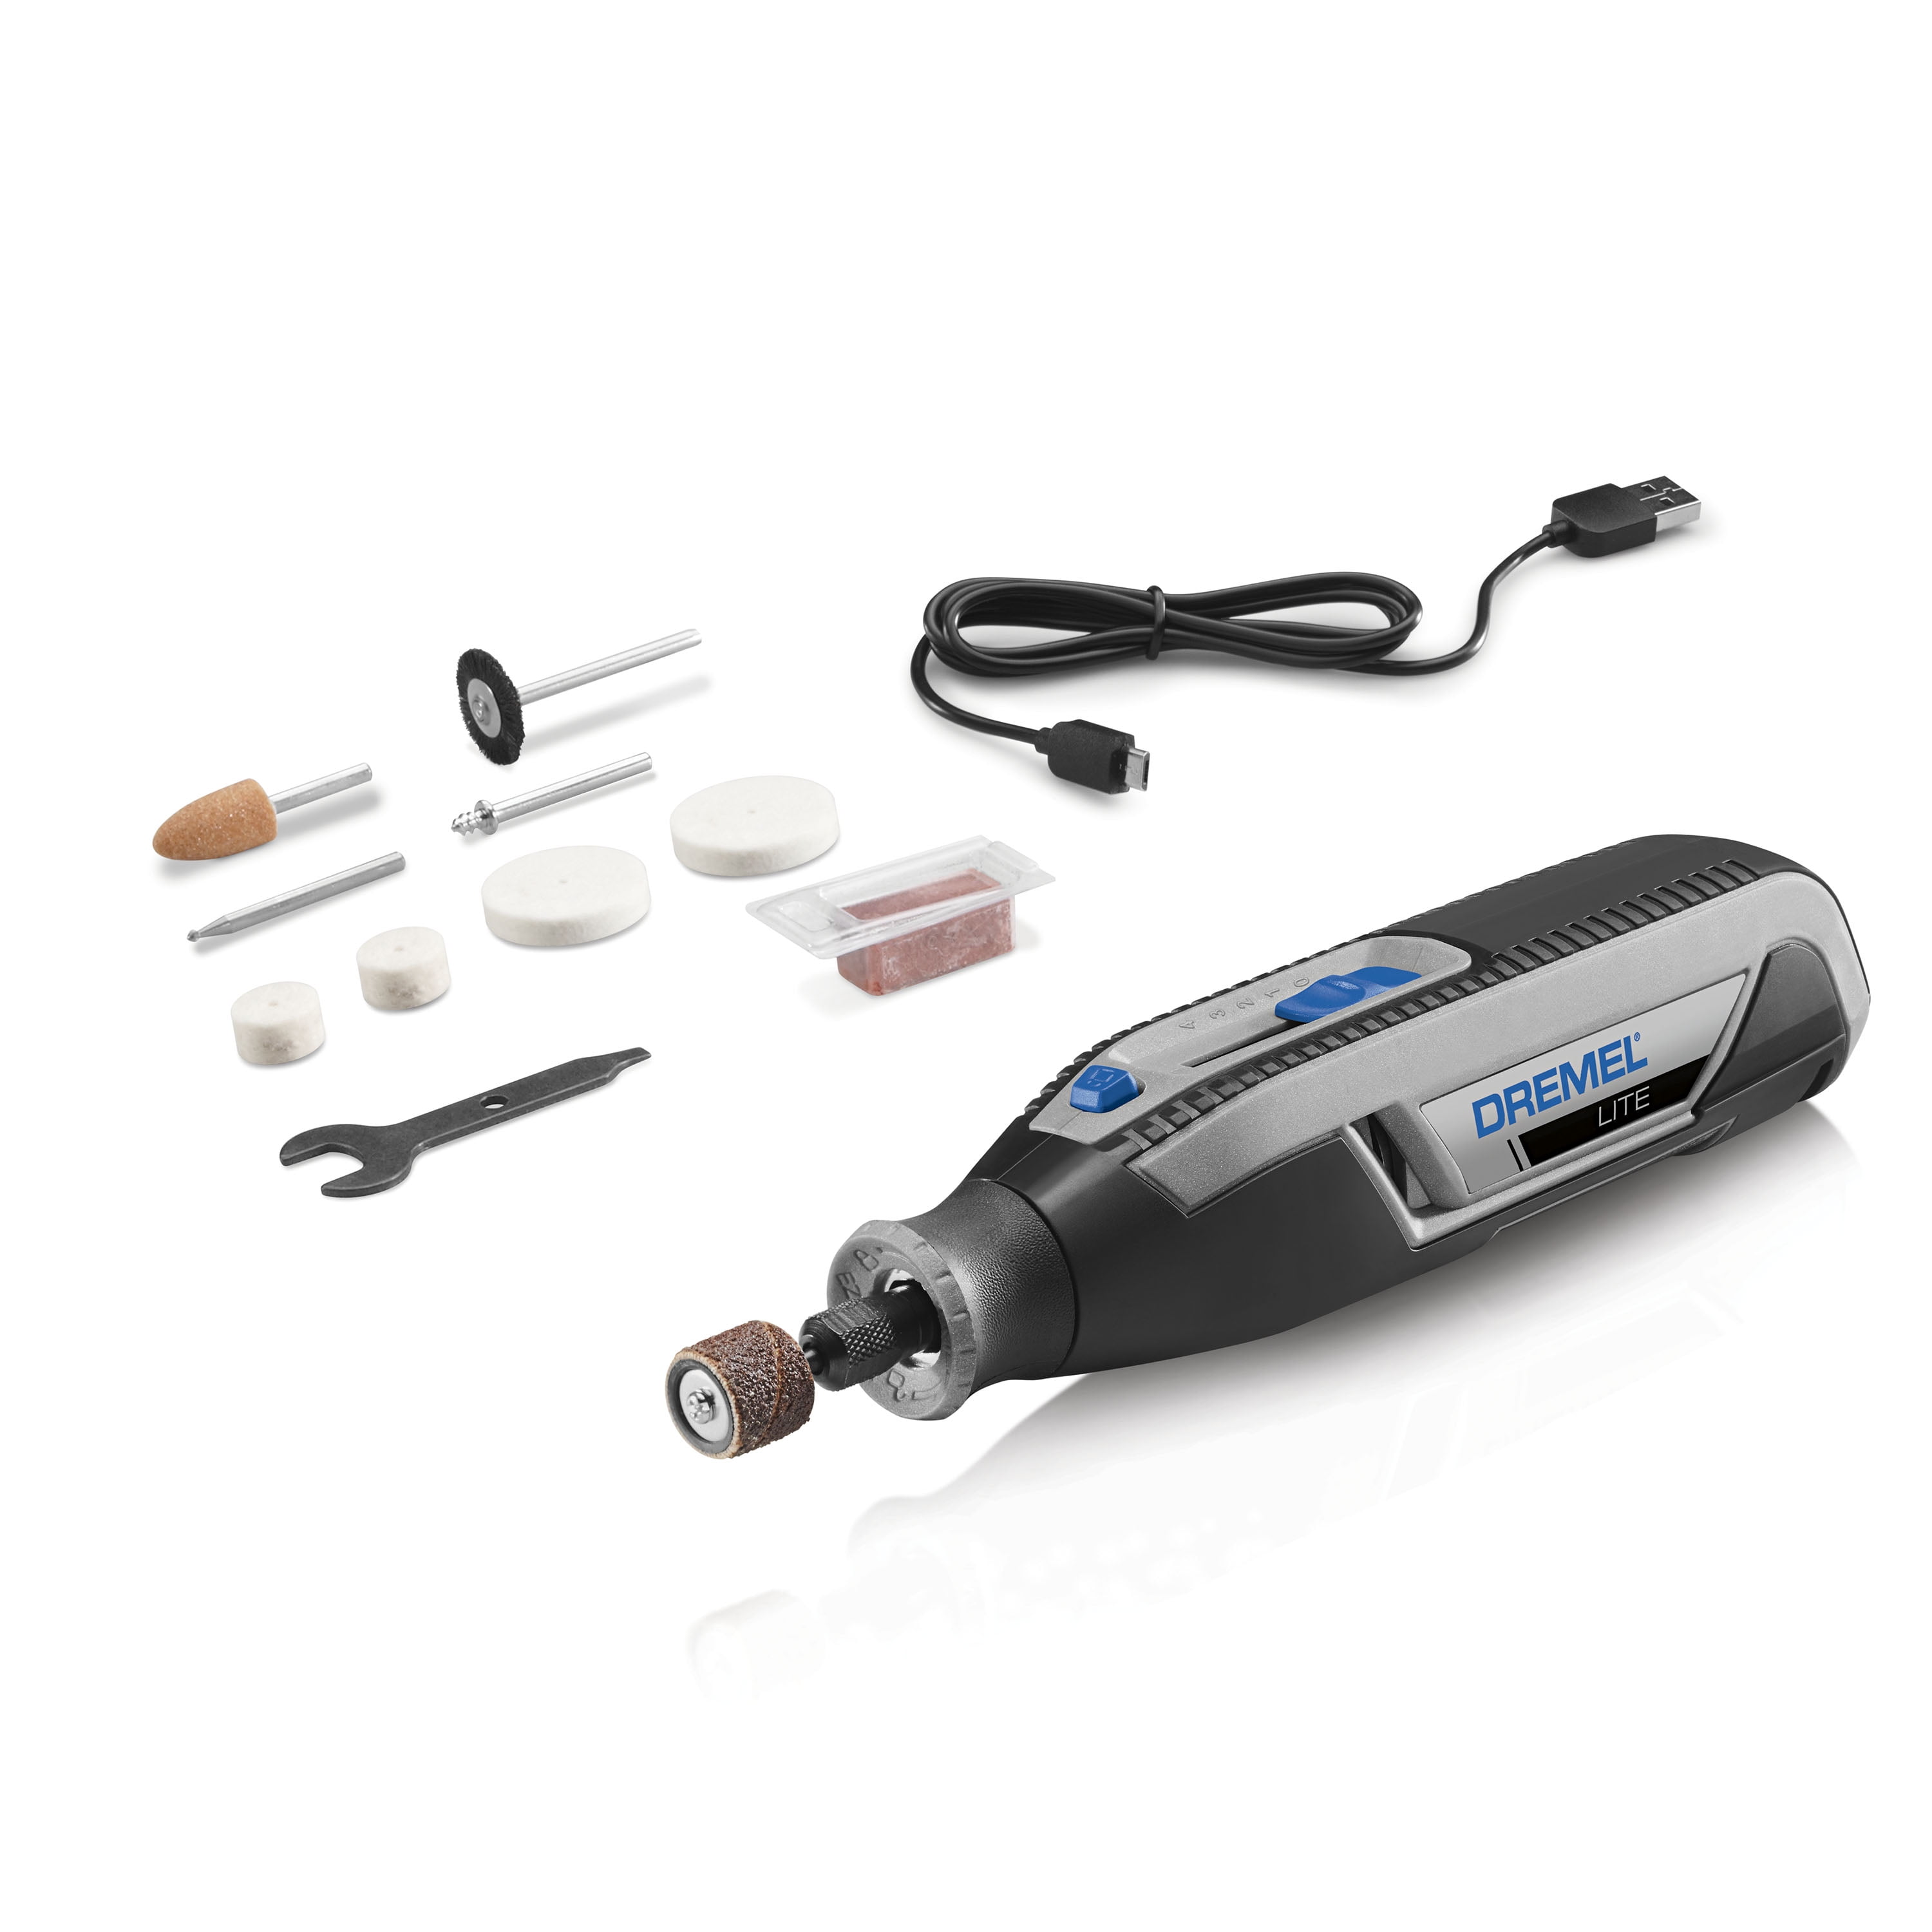 Dremel Rotary Tool with 10 Accessories Kit 3000-N/10 Variable Speed 220V 